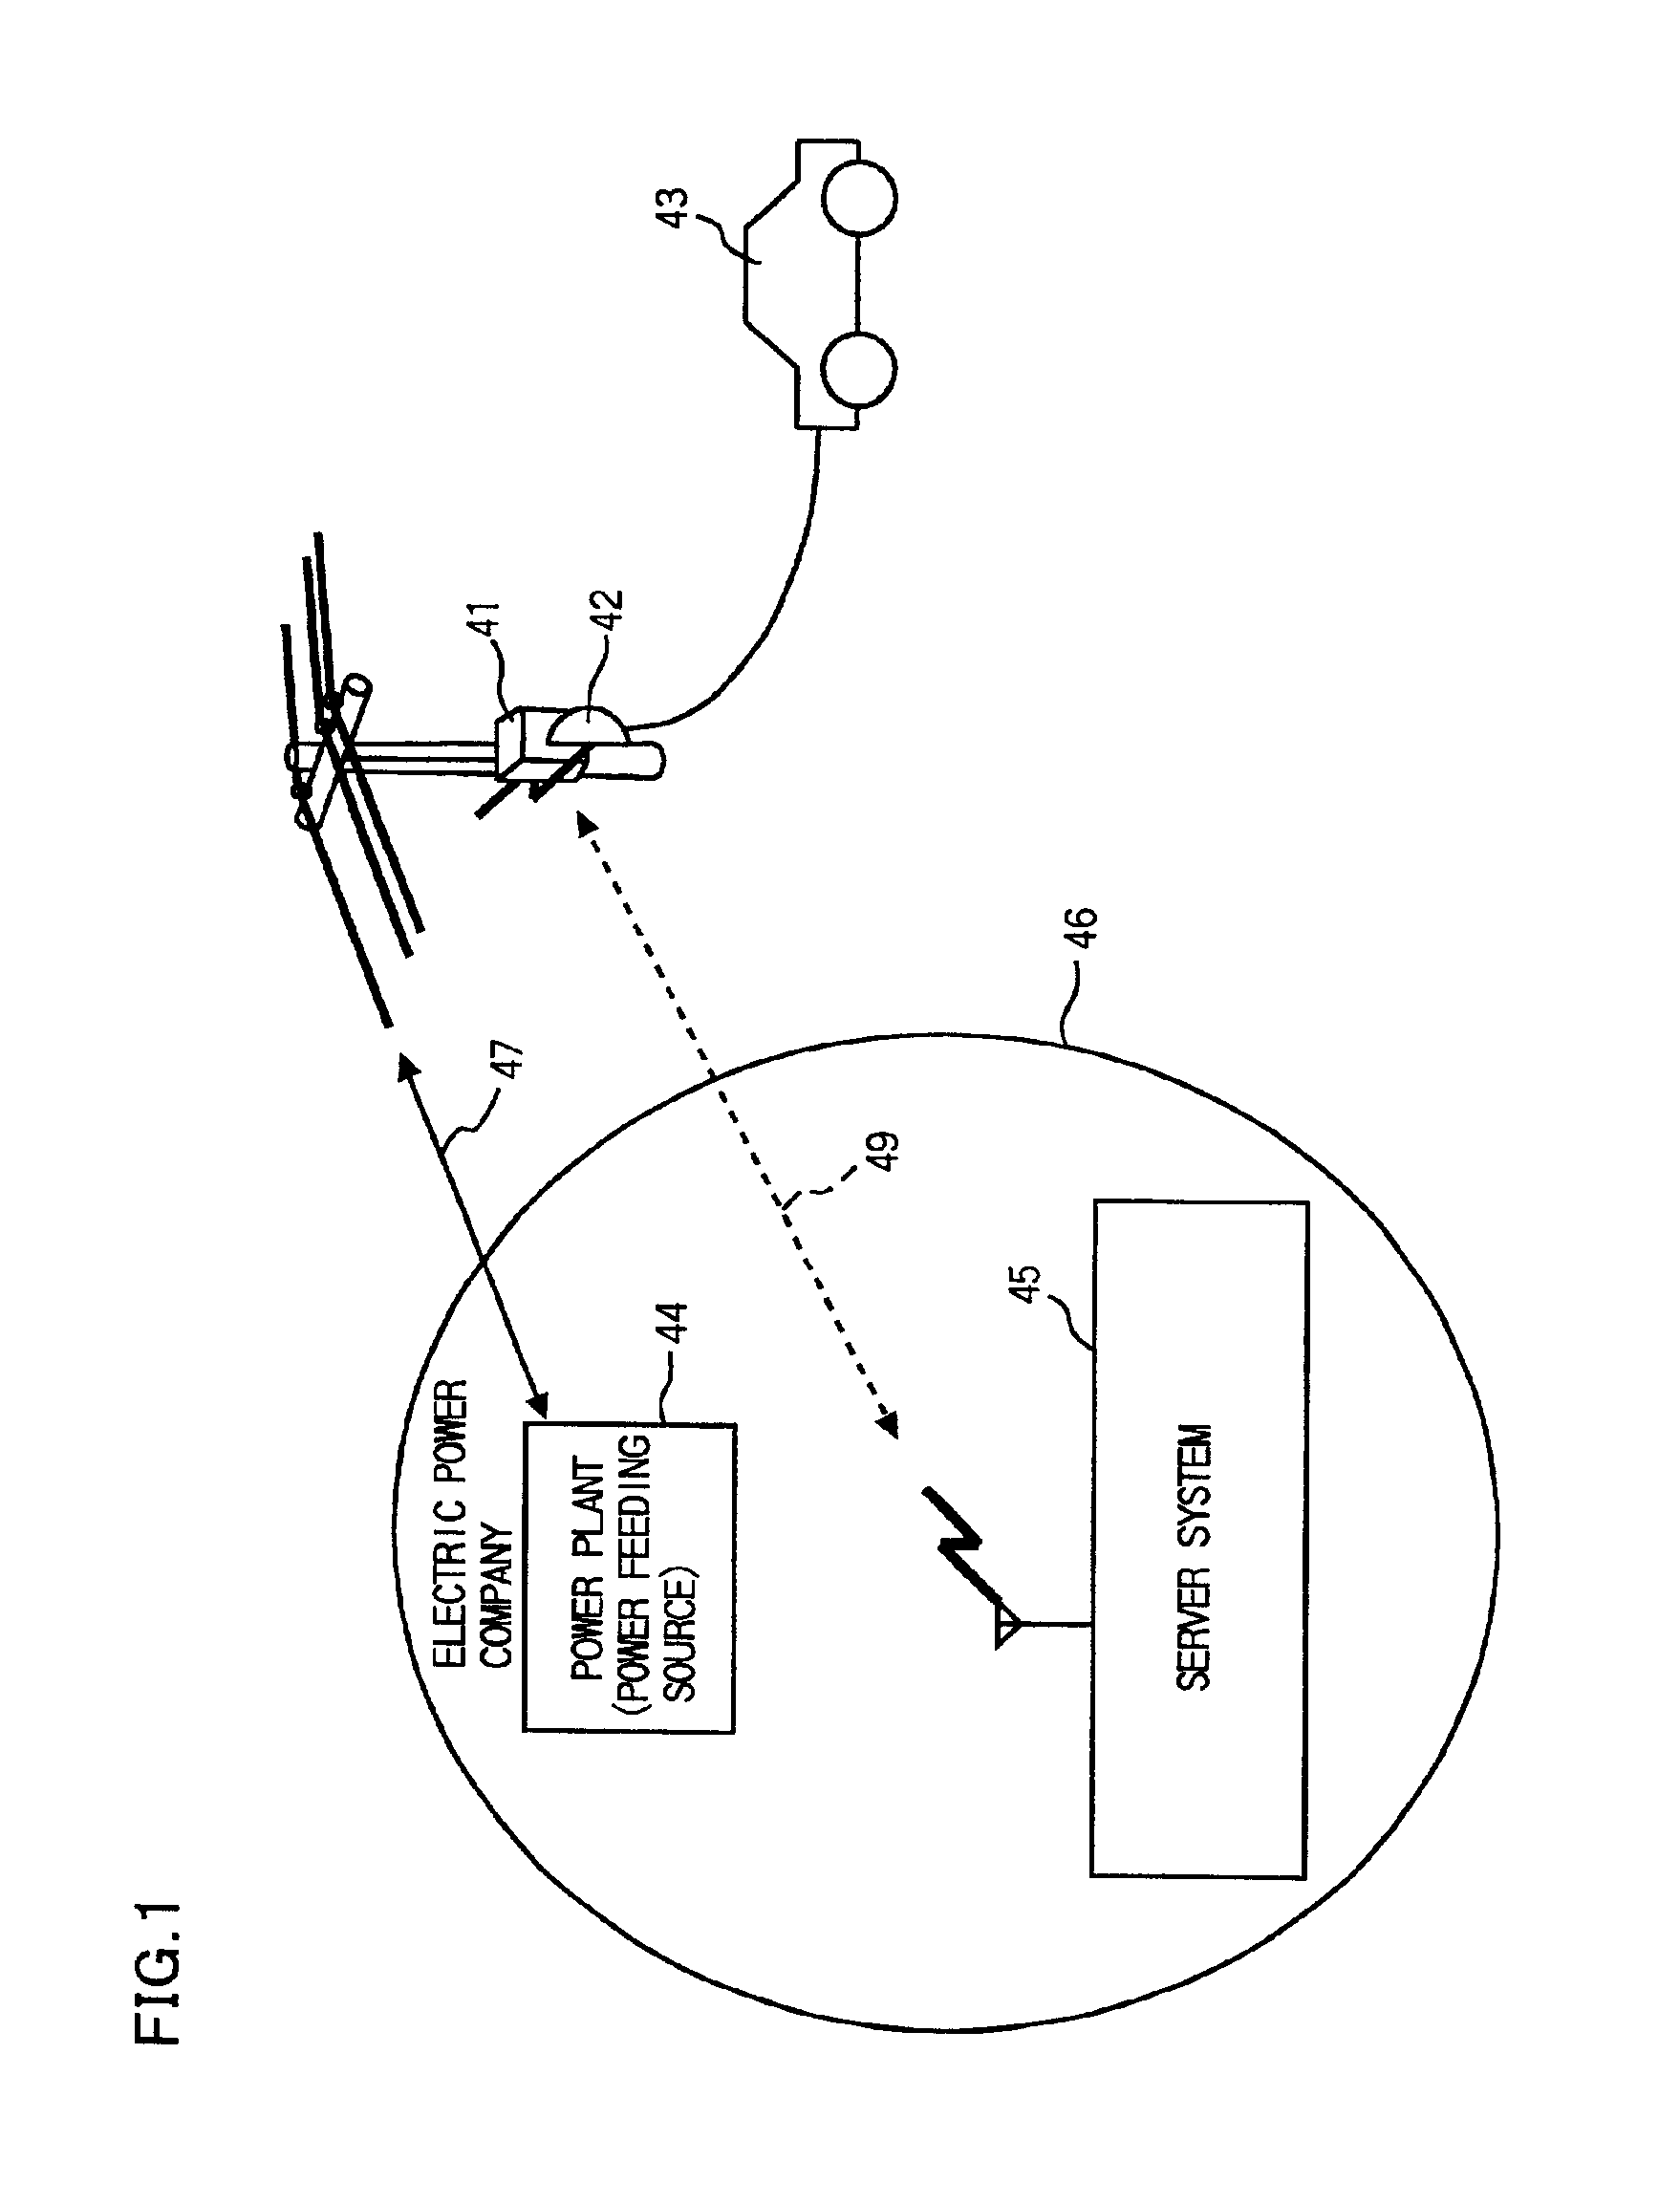 Mobile receptacle, power feeding gate device, server device and power usage management system for efficiently delivering electric power